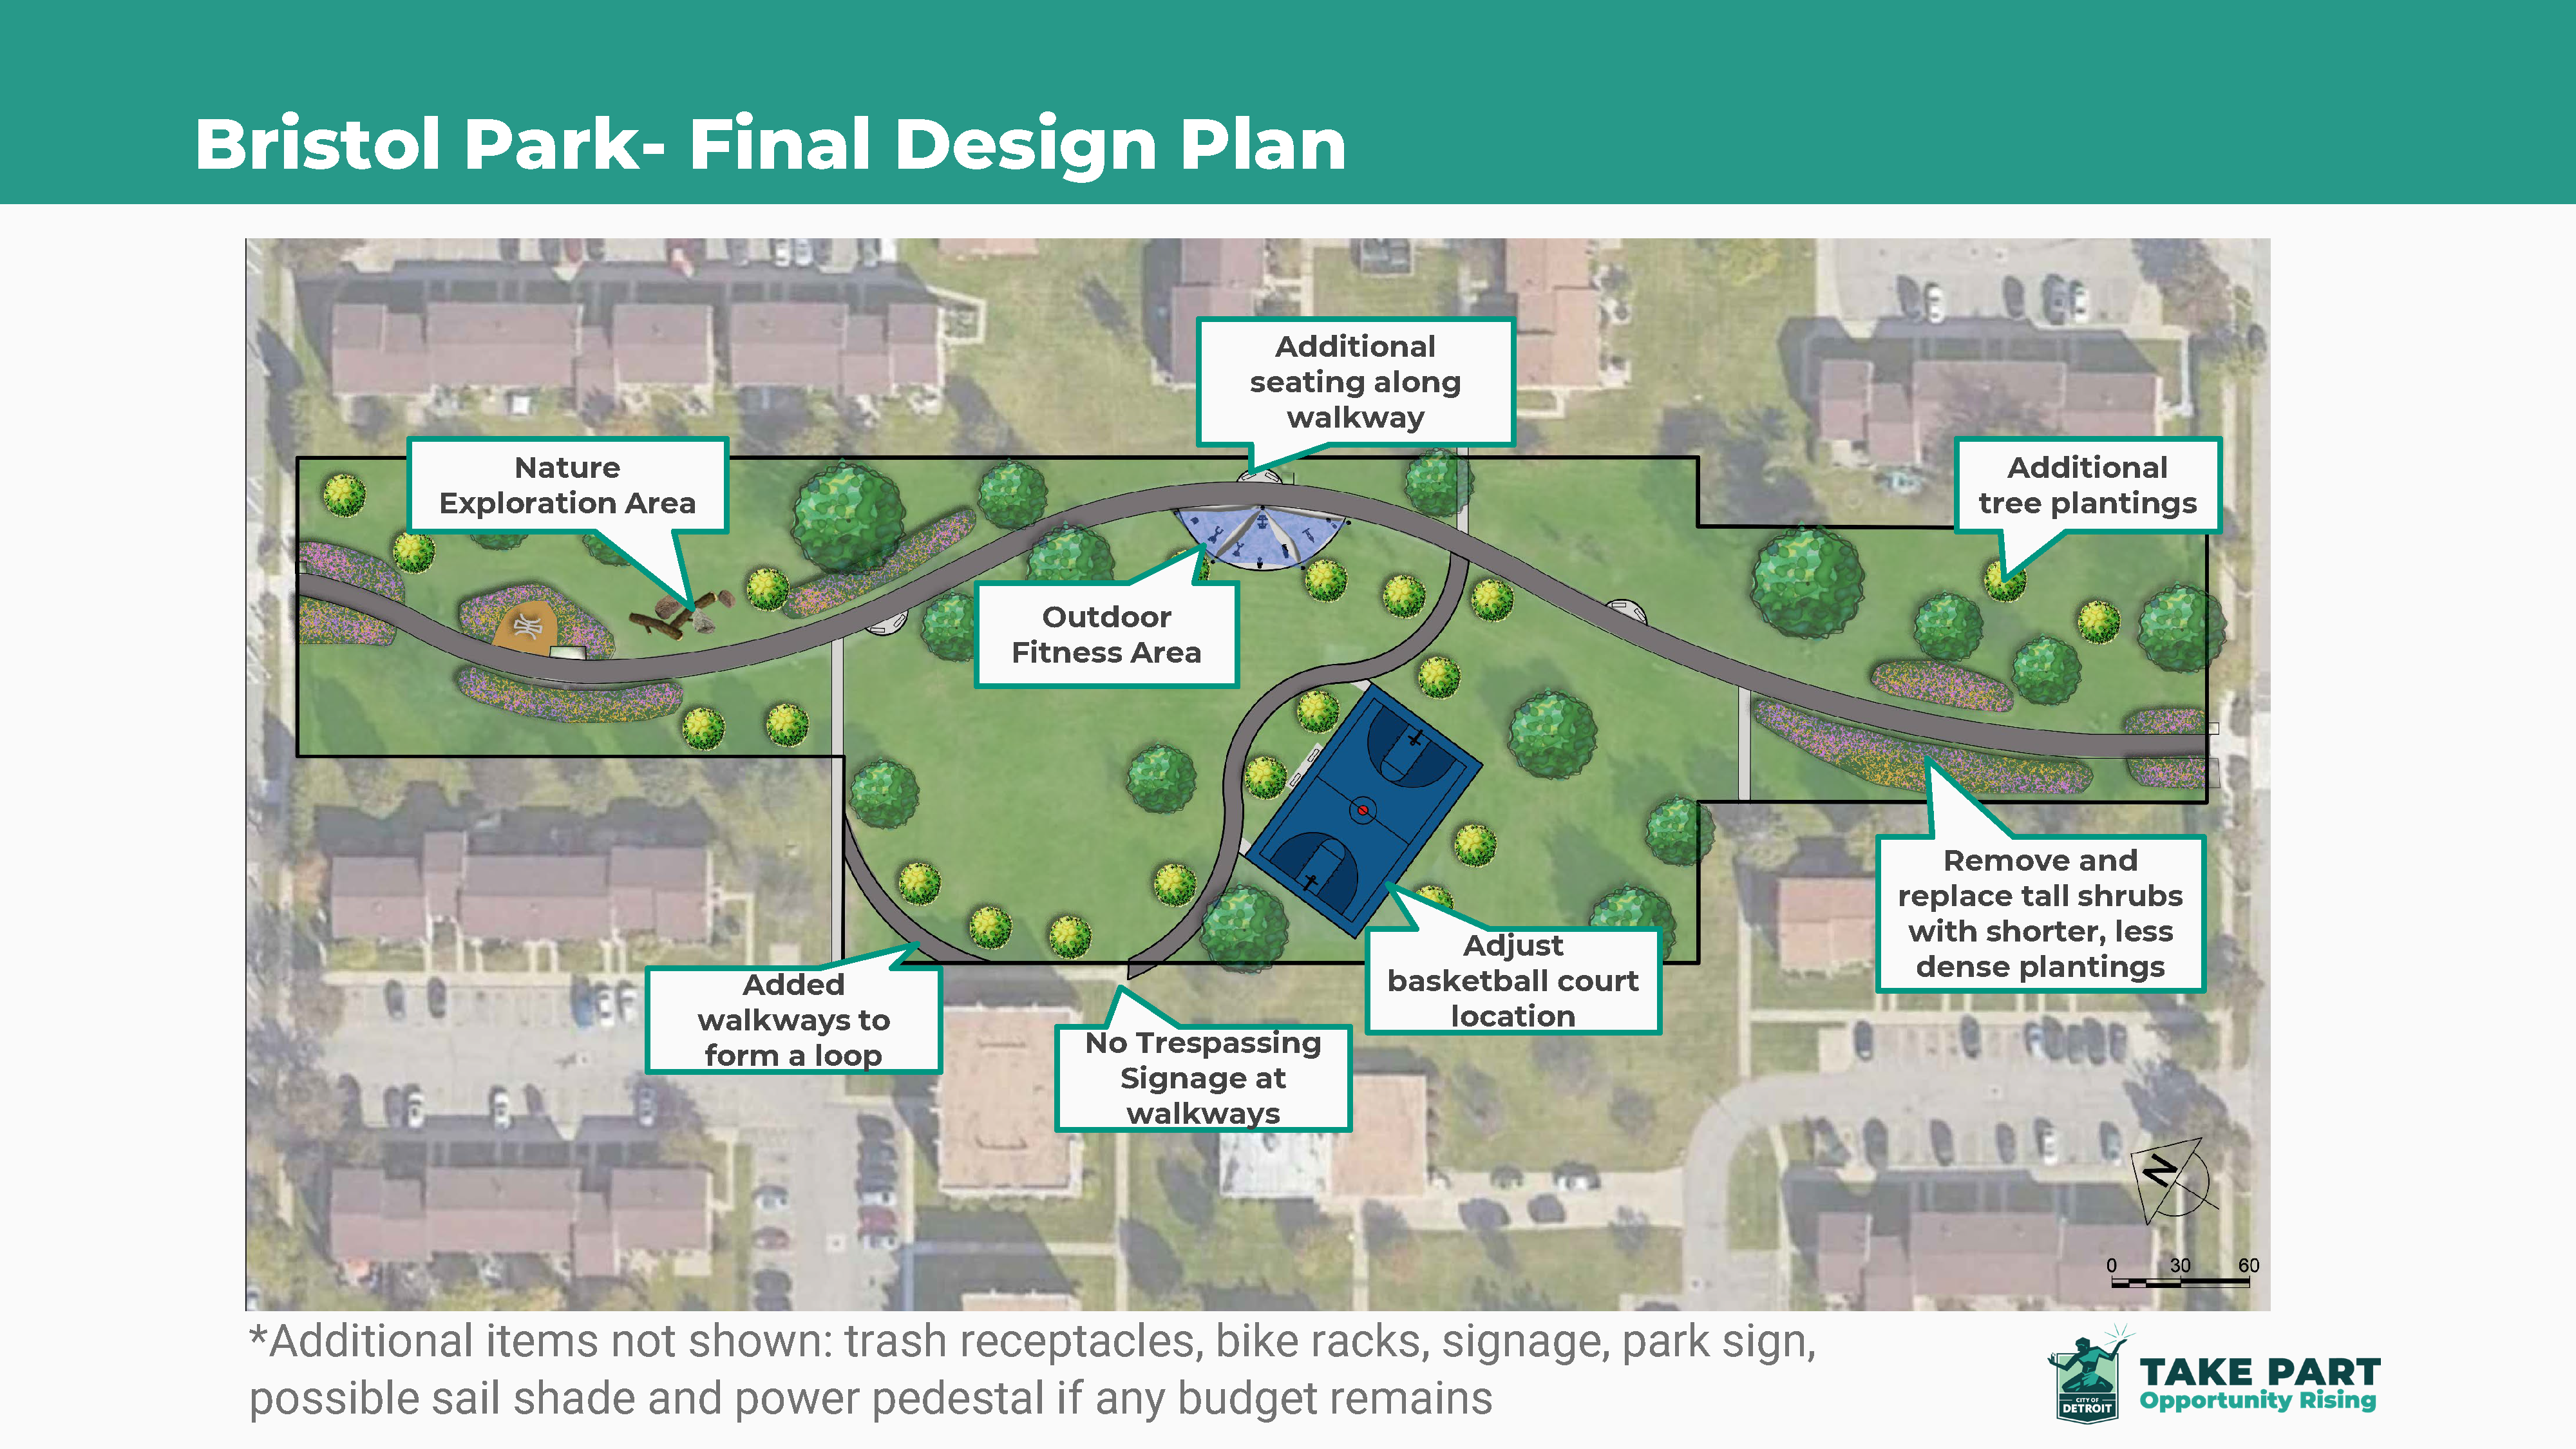 Bristol Park - Final Design Plan: Nature exploration area, Outdoor fitness area, Additional seating, Additional tree plantings, Remove tall shrubs and replace with shorter, less dense plantings, Adjust basketball court location, No trespassing signage at walkways, Added walkways to form a loop. *Additional items not shown: trash receptacles, bike racks, signage, park sign, possible sail shade and power pedestal if budget remains.